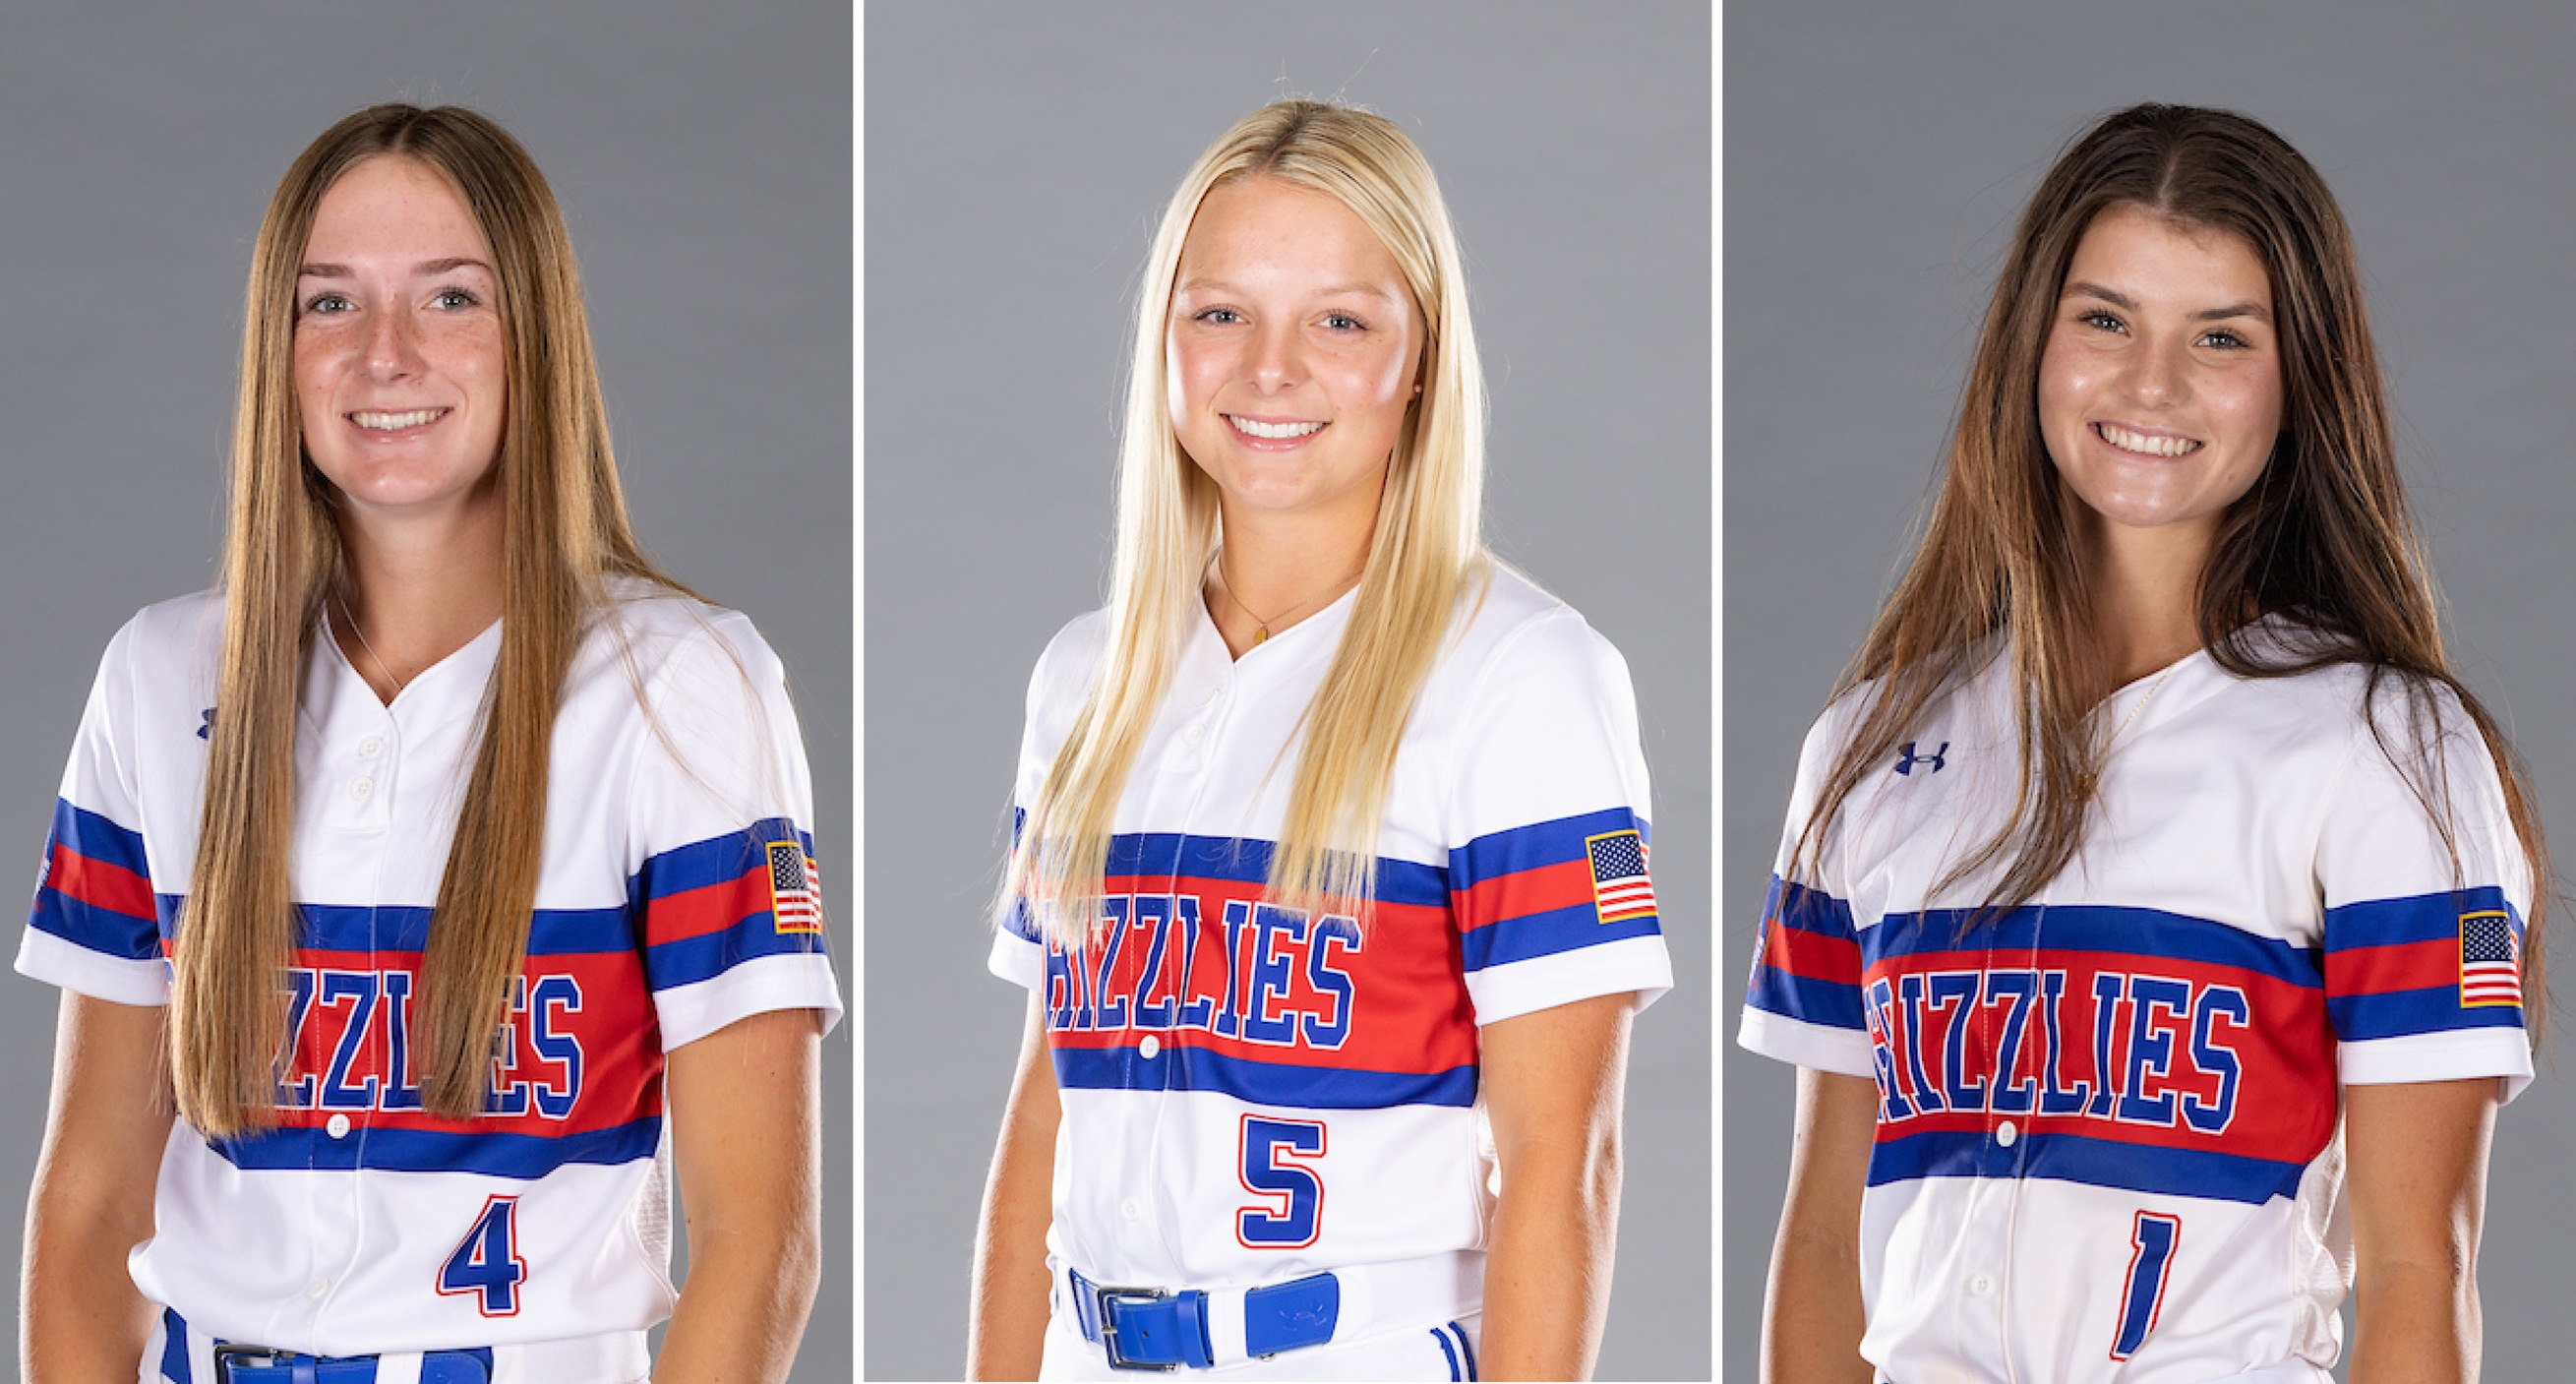 Grizzly Softball players, from left, Jordyn Foley, Zoey Williams and Kenzie Massey received NJCAA All-Region 16 team honors this season. Foley and Williams were named to the first team, and Massey was named to the second team. (MSU-WP Photo)